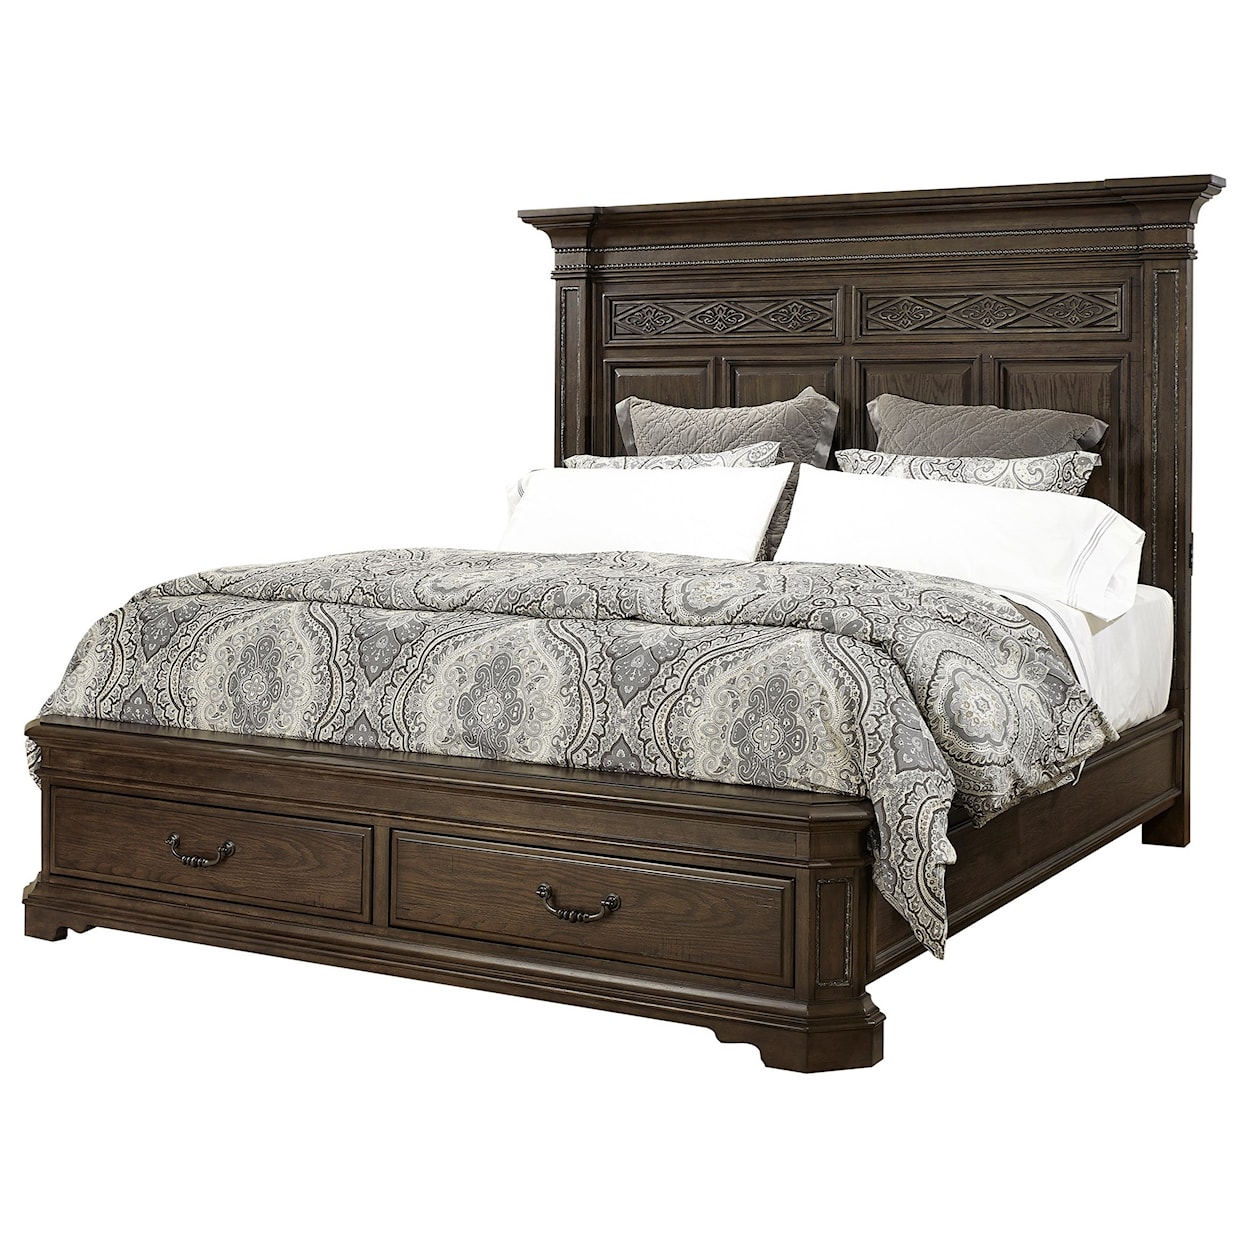 Aspenhome Foxhill King Estate Panel Bed w/ Storage